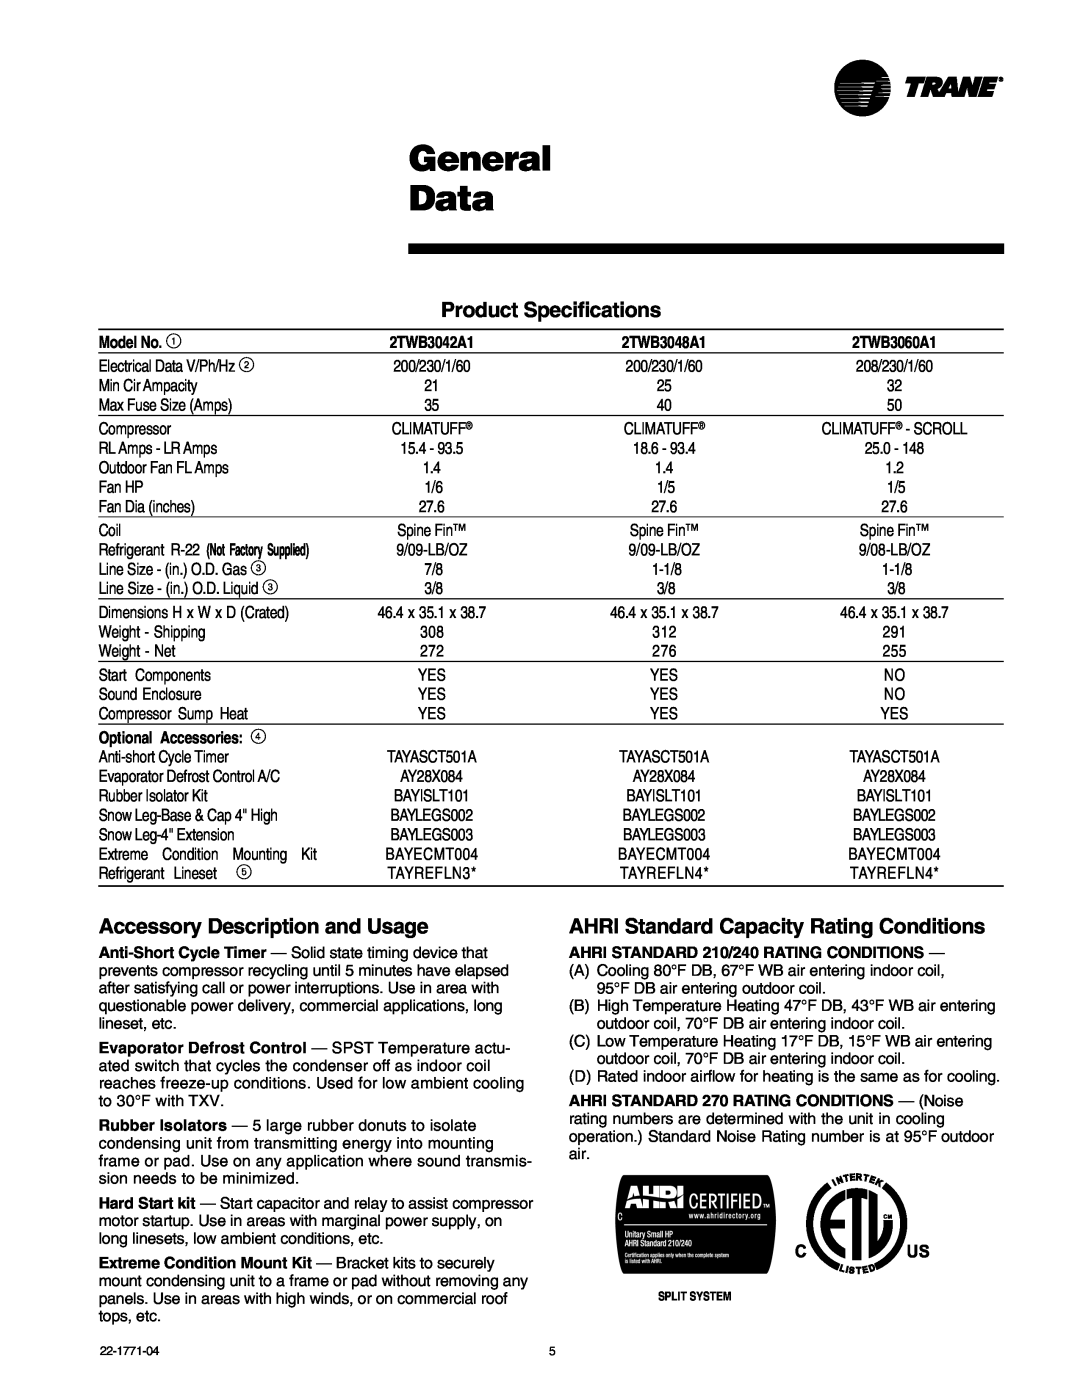 Trane 2TWB3018-060 manual General Data, Product Specifications, Accessory Description and Usage 